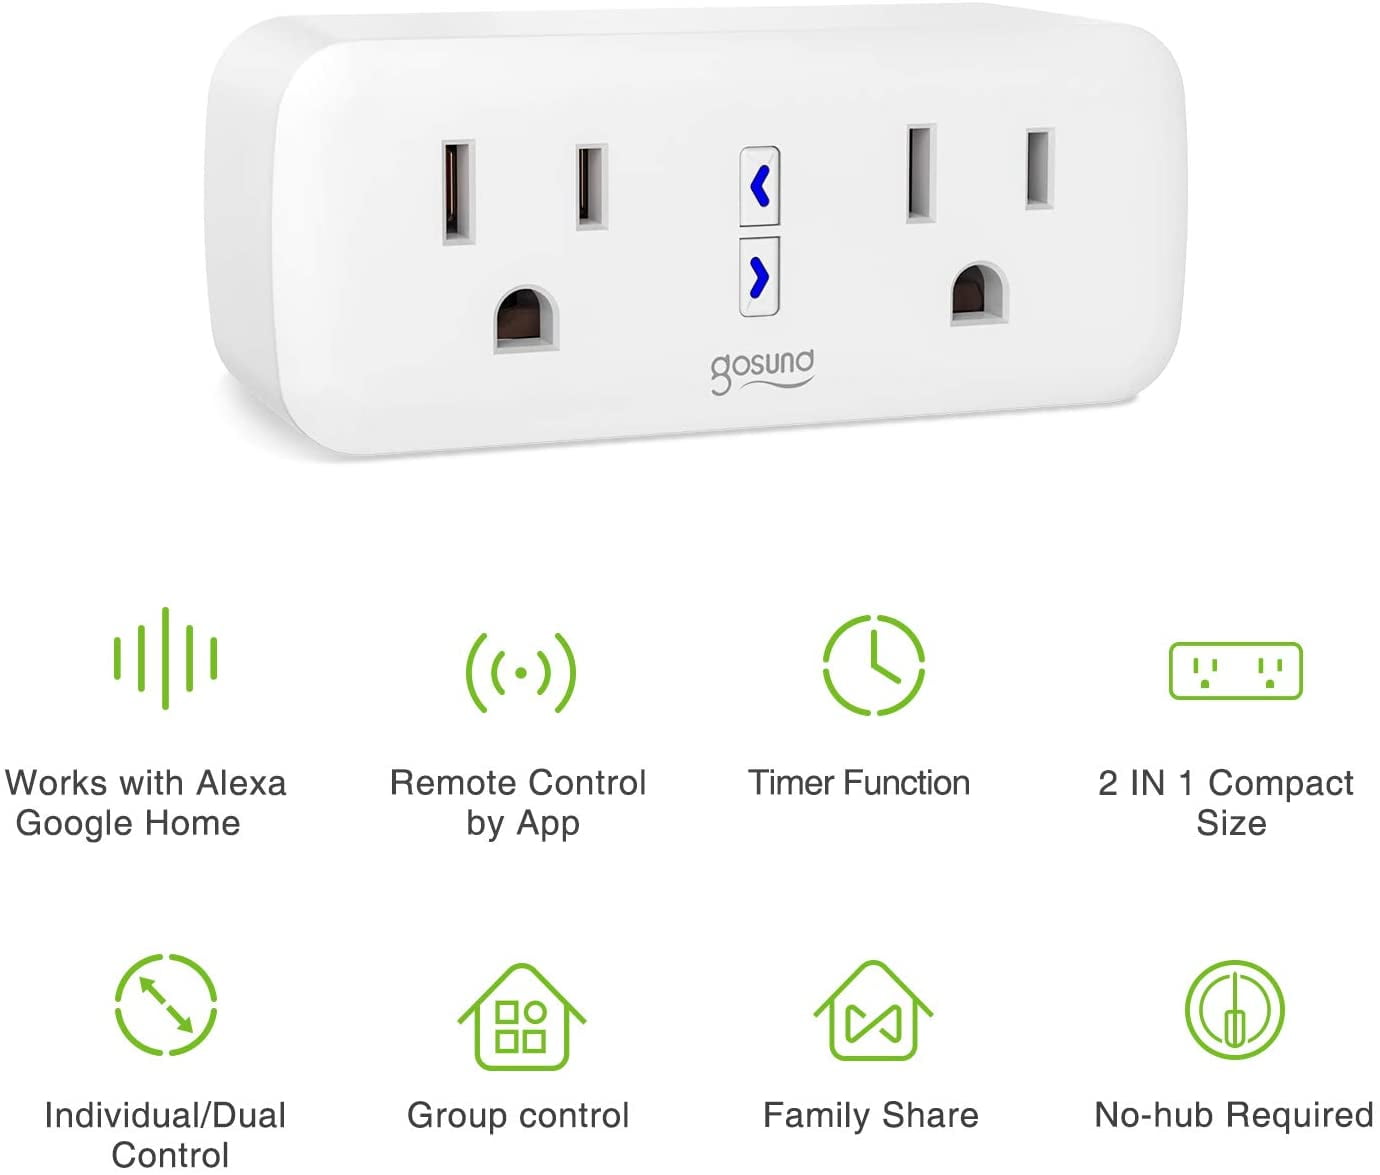 General Brand 2 Pack WiFi Smart Plug (Compatible with  Alexa